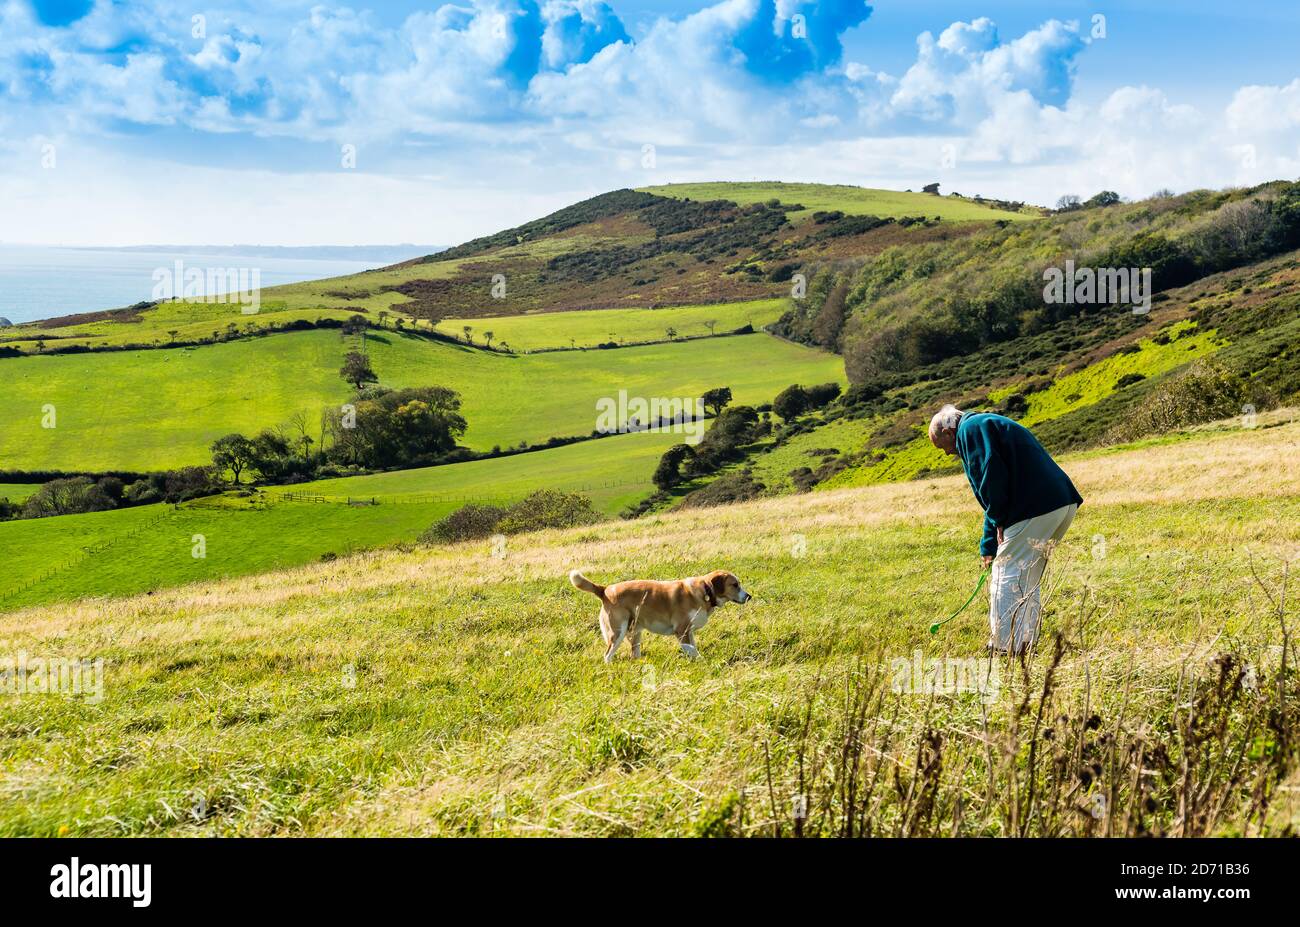 The Purbeck Hills. Stock Photo